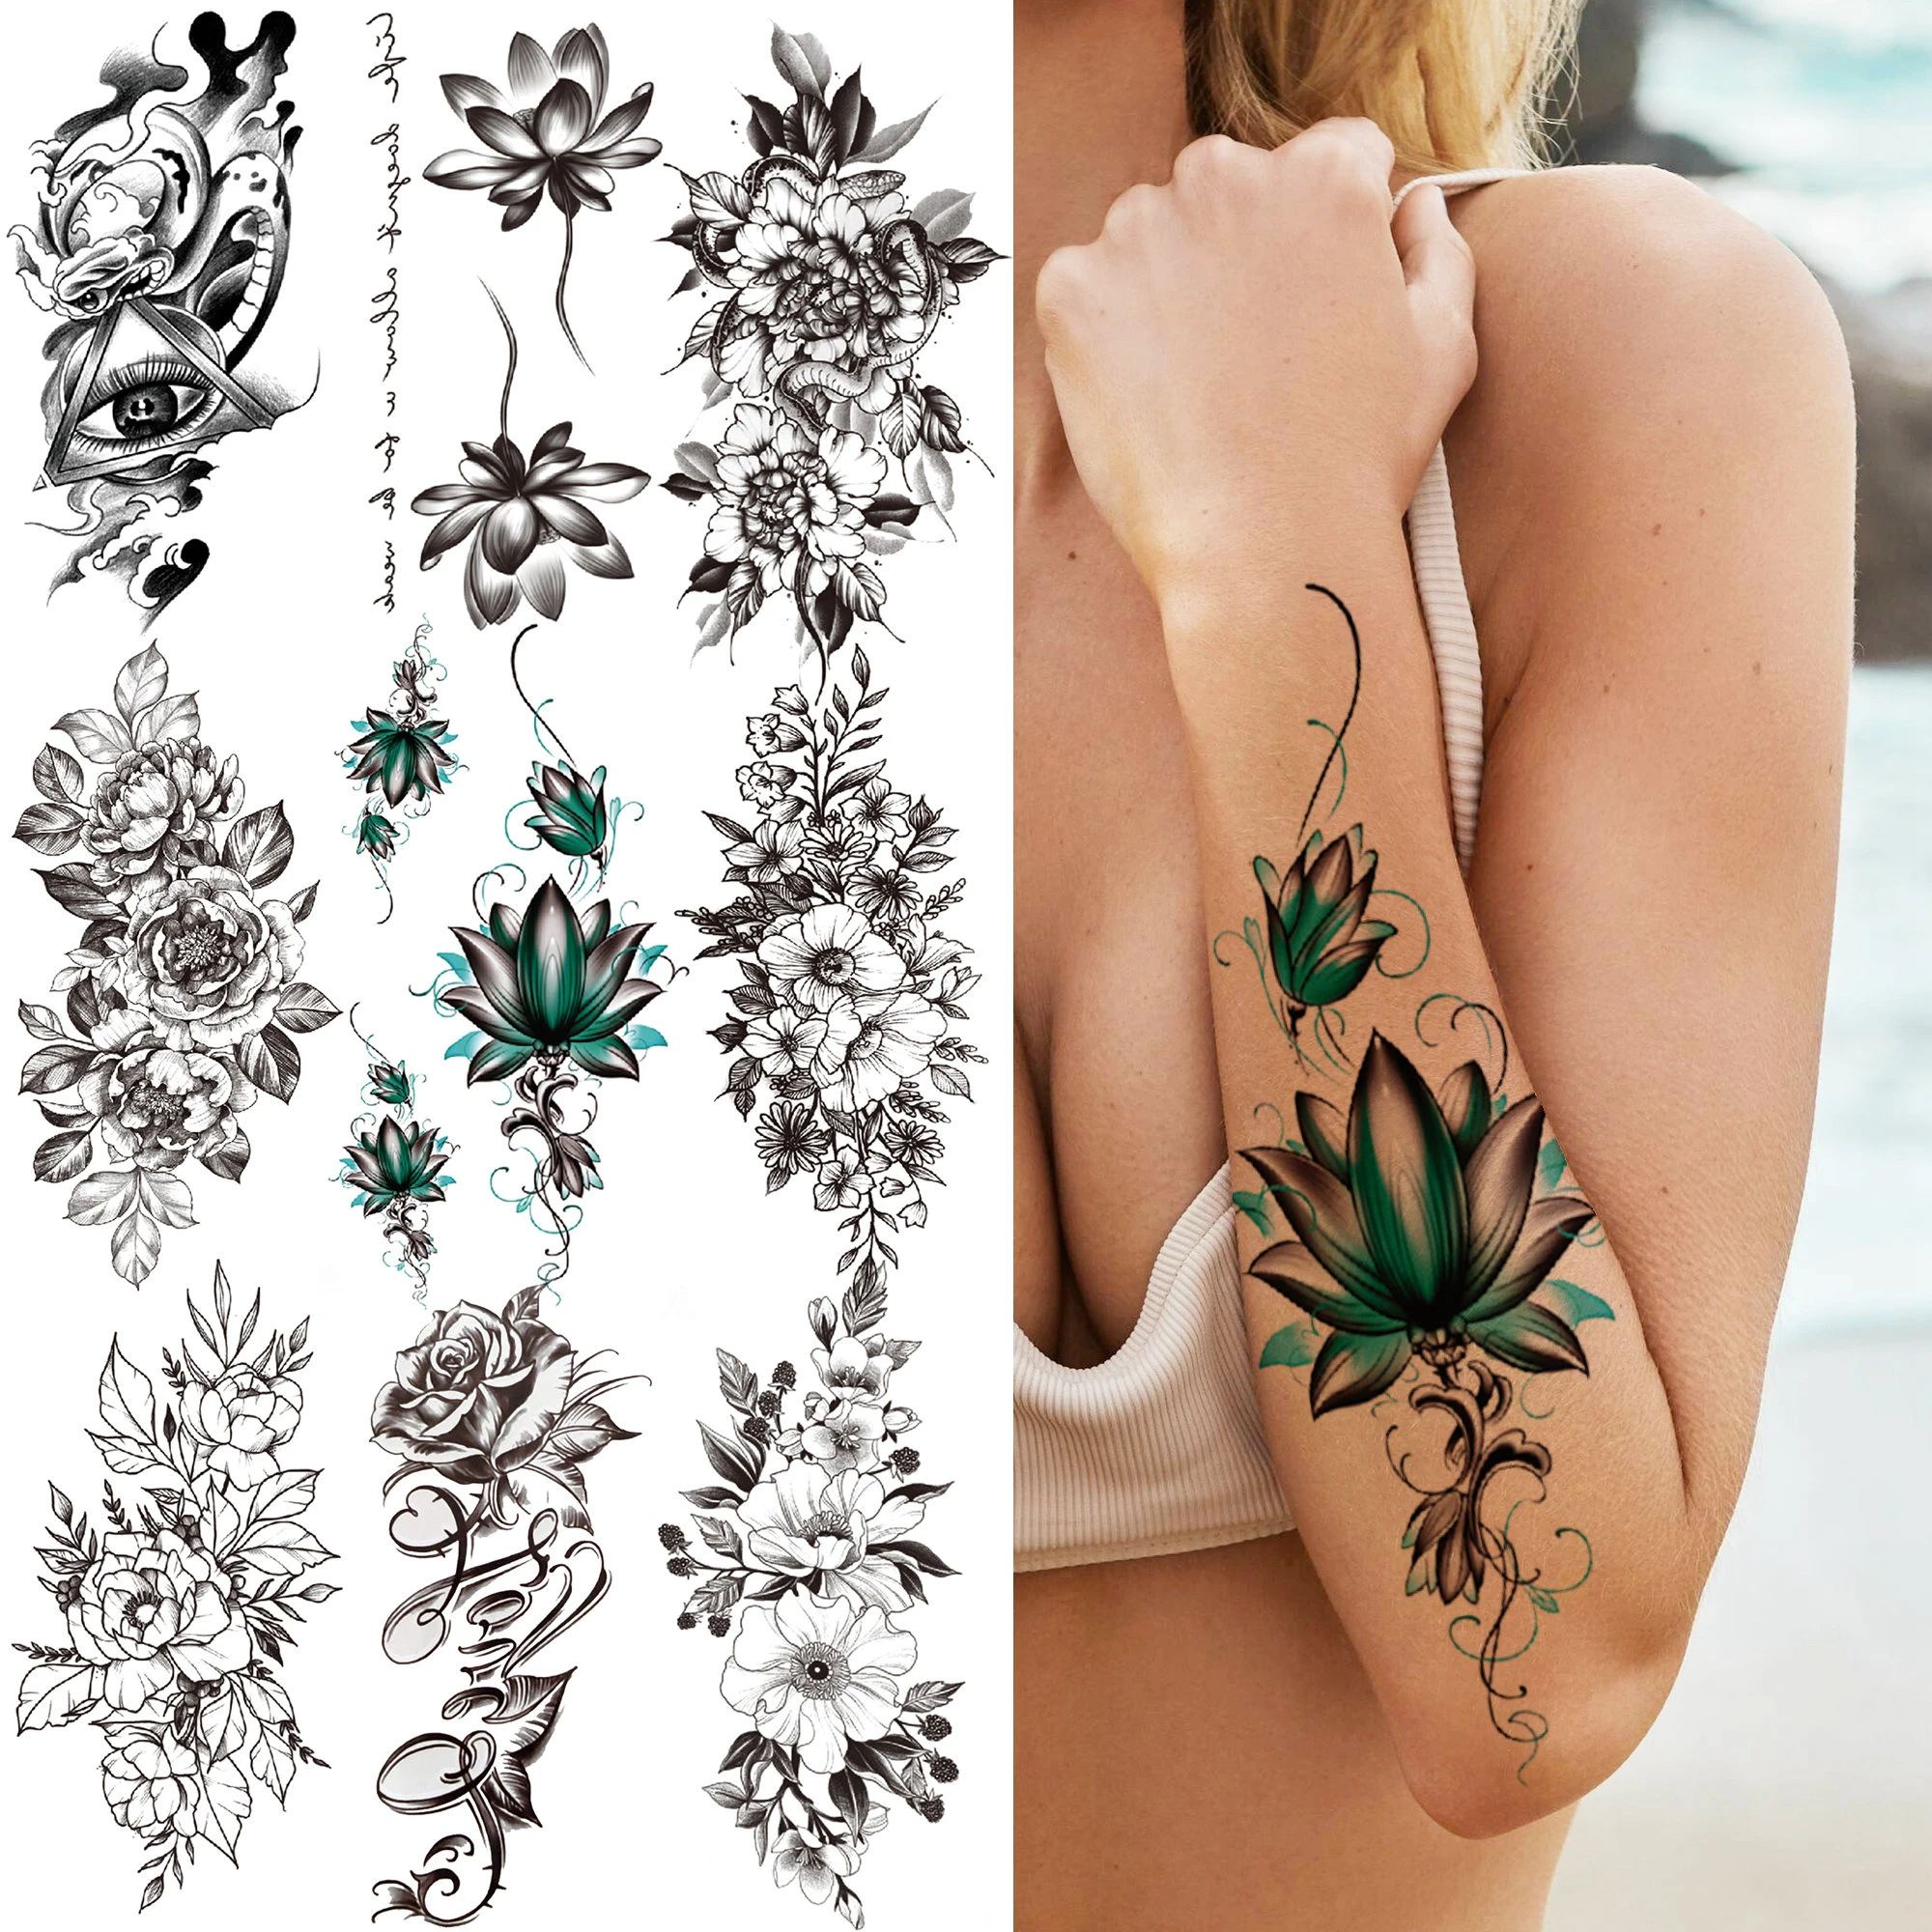 3d Lotus Chains Temporary Tattoo For Girl Women Black Triangle Eye Flower  Tattoos Sticker Fake Peony Orchid Rose Tatoos Arm Back - Temporary Tattoos  - AliExpress